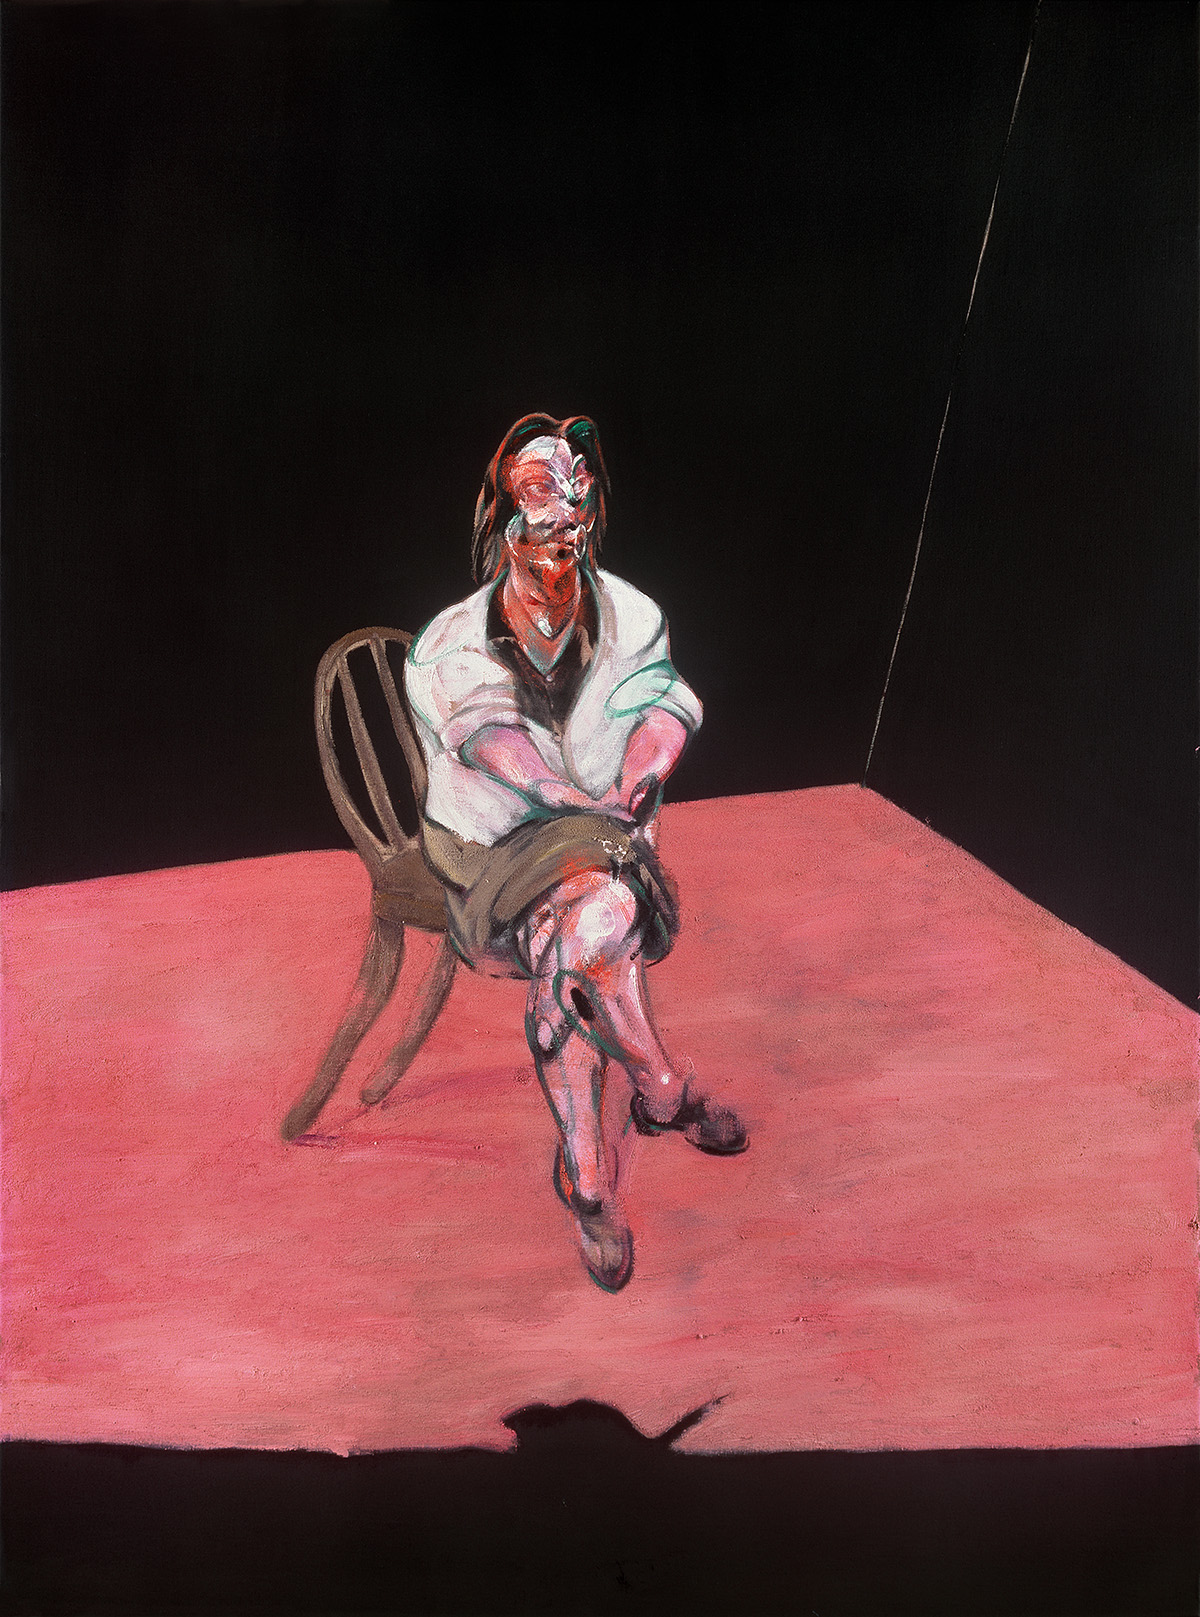 Study for Portrait (Isabel Rawsthorne), 1964. CR Number 64-12. Oil on canvas. © The Estate of Francis Bacon / DACS London 2021. All rights reserved.